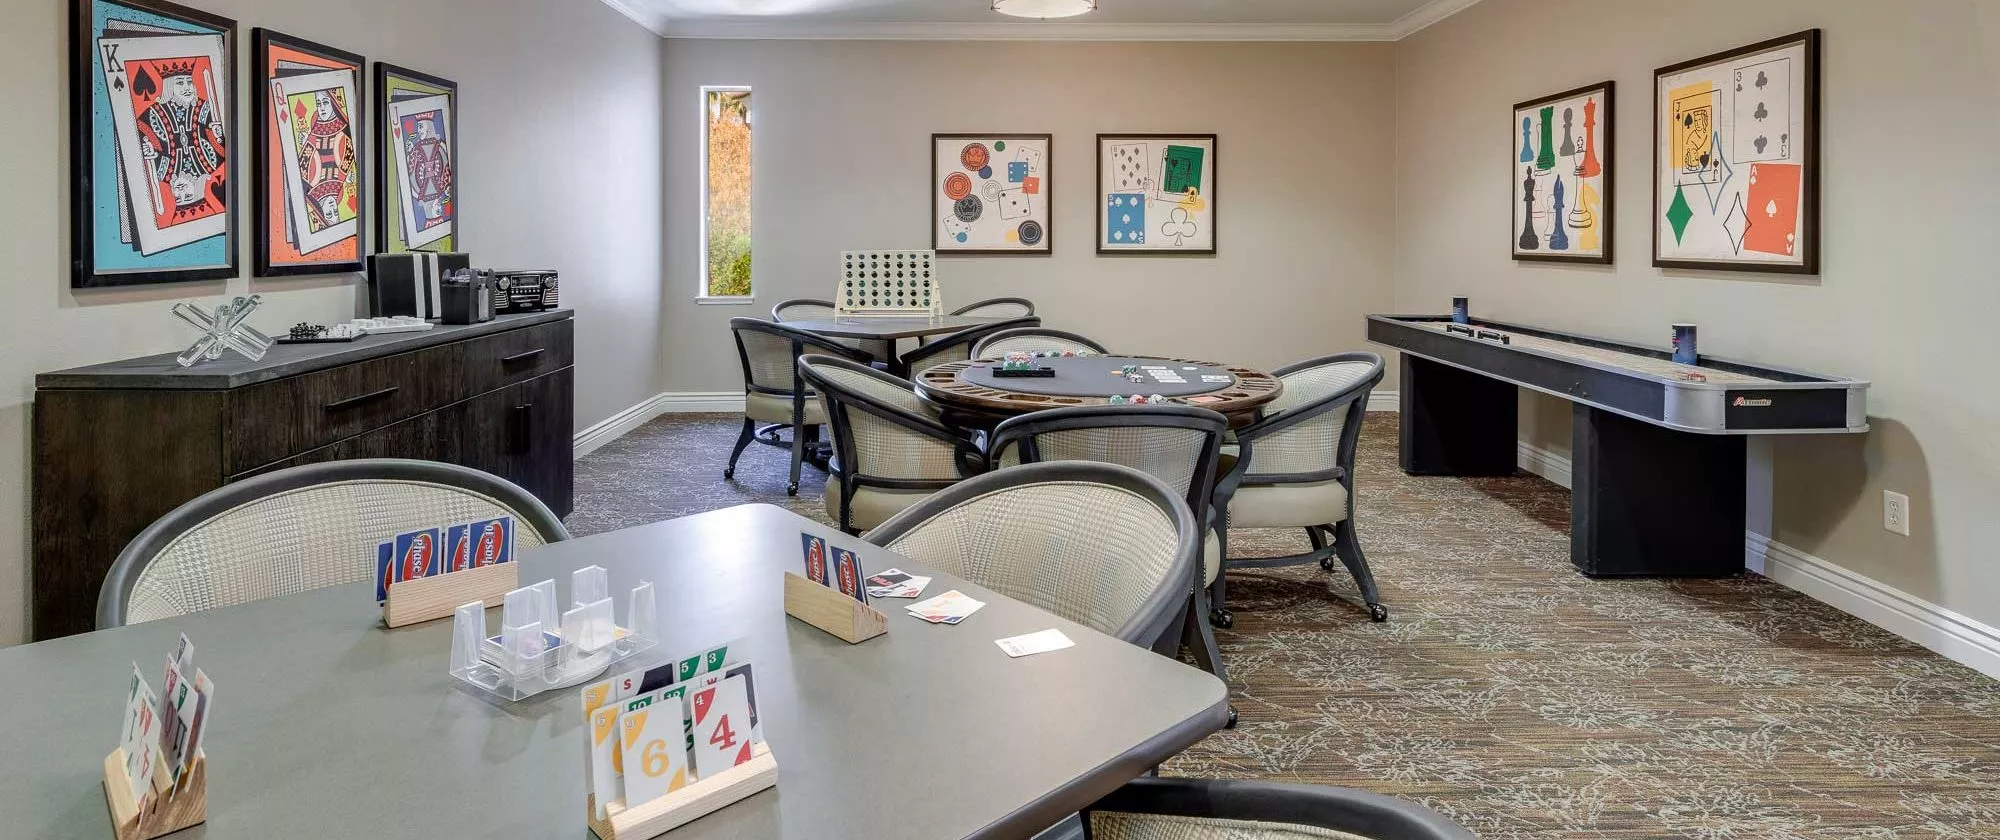 Las Vegas activity room with tables and games